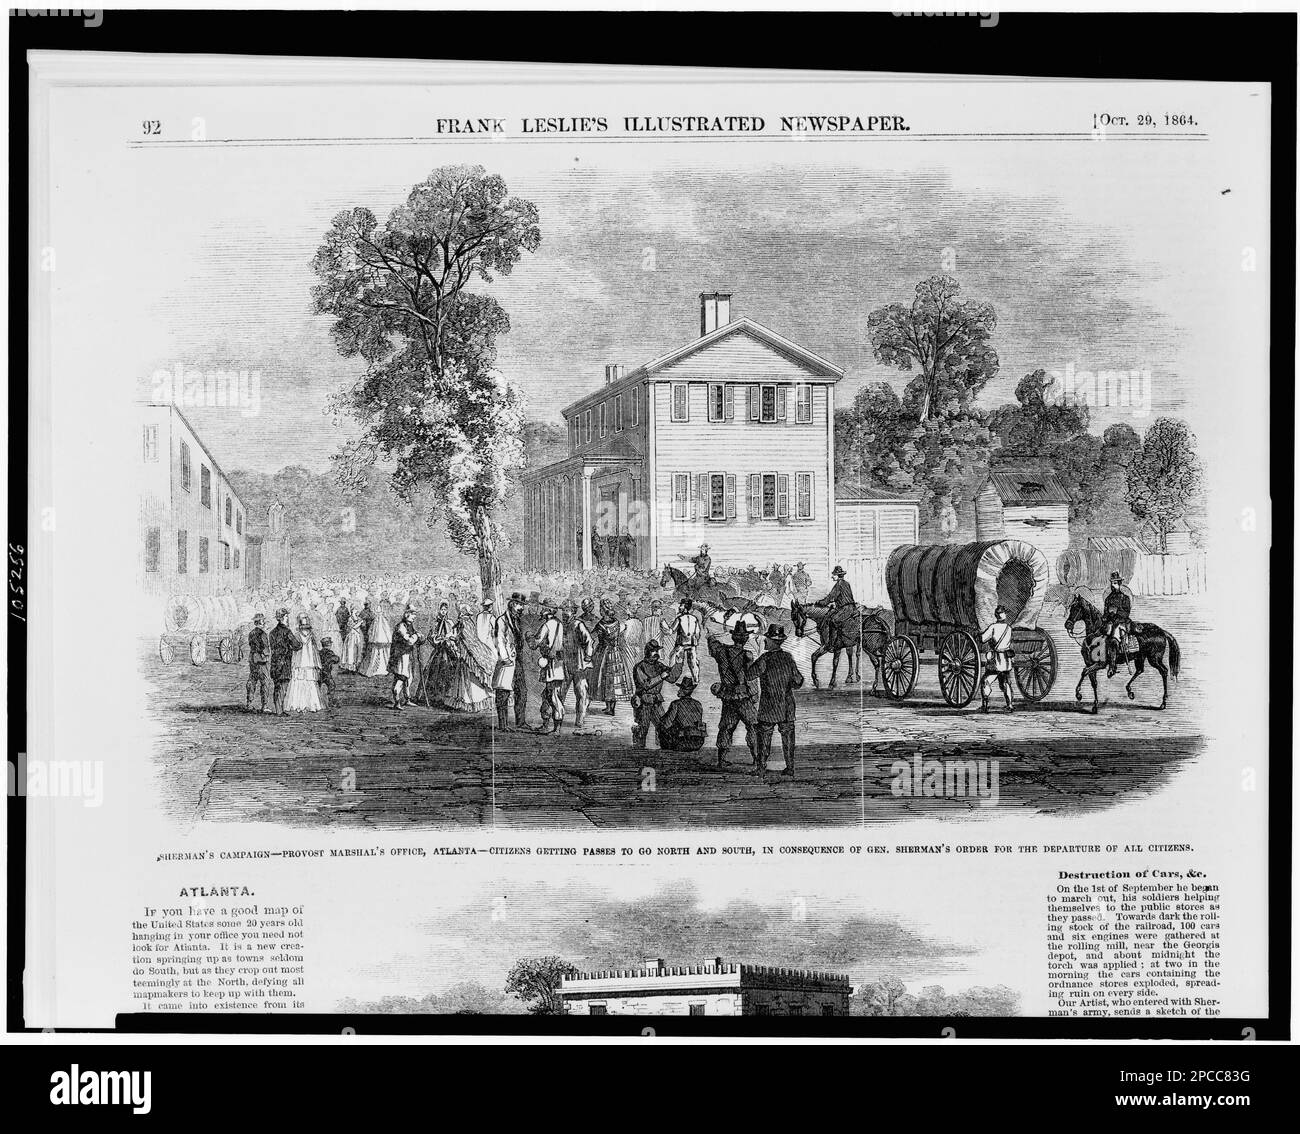 Sherman's campaign--provost marshal's office, Atlanta--citizens getting passes to go north and south, in consequence of General Sherman's order for the departure of all citizens. Illus. in: Frank Leslie's illustrated newspaper, 1864 Oct. 29, p. 92. United States, History, Civil War, 1861-1865, Civil defense, Evacuations, Georgia, Atlanta, 1860-1870. Stock Photo